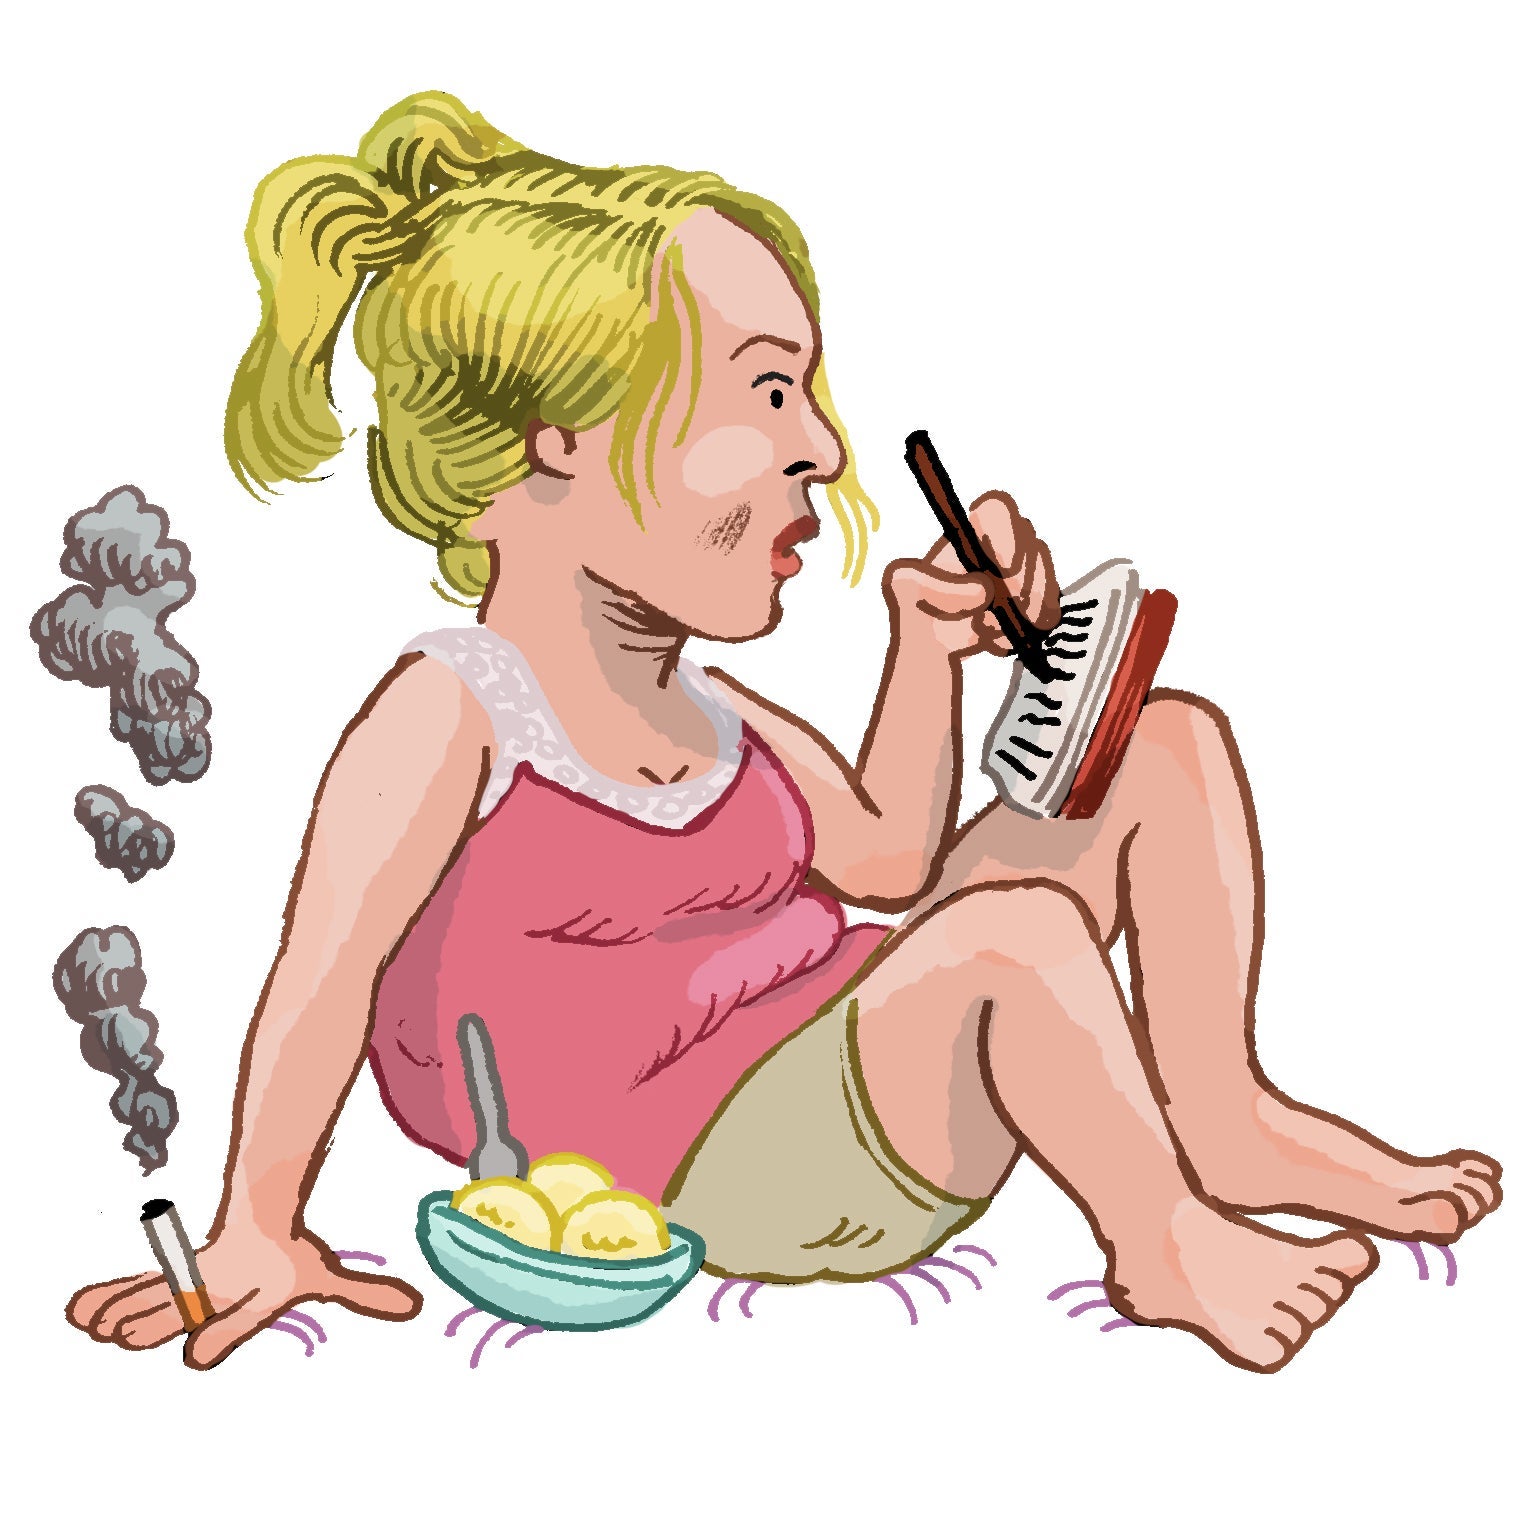 Illustration of Bridget Jones writing in her diary with one hand and holding a cigarette in the other, with a bowl of ice cream beside her.